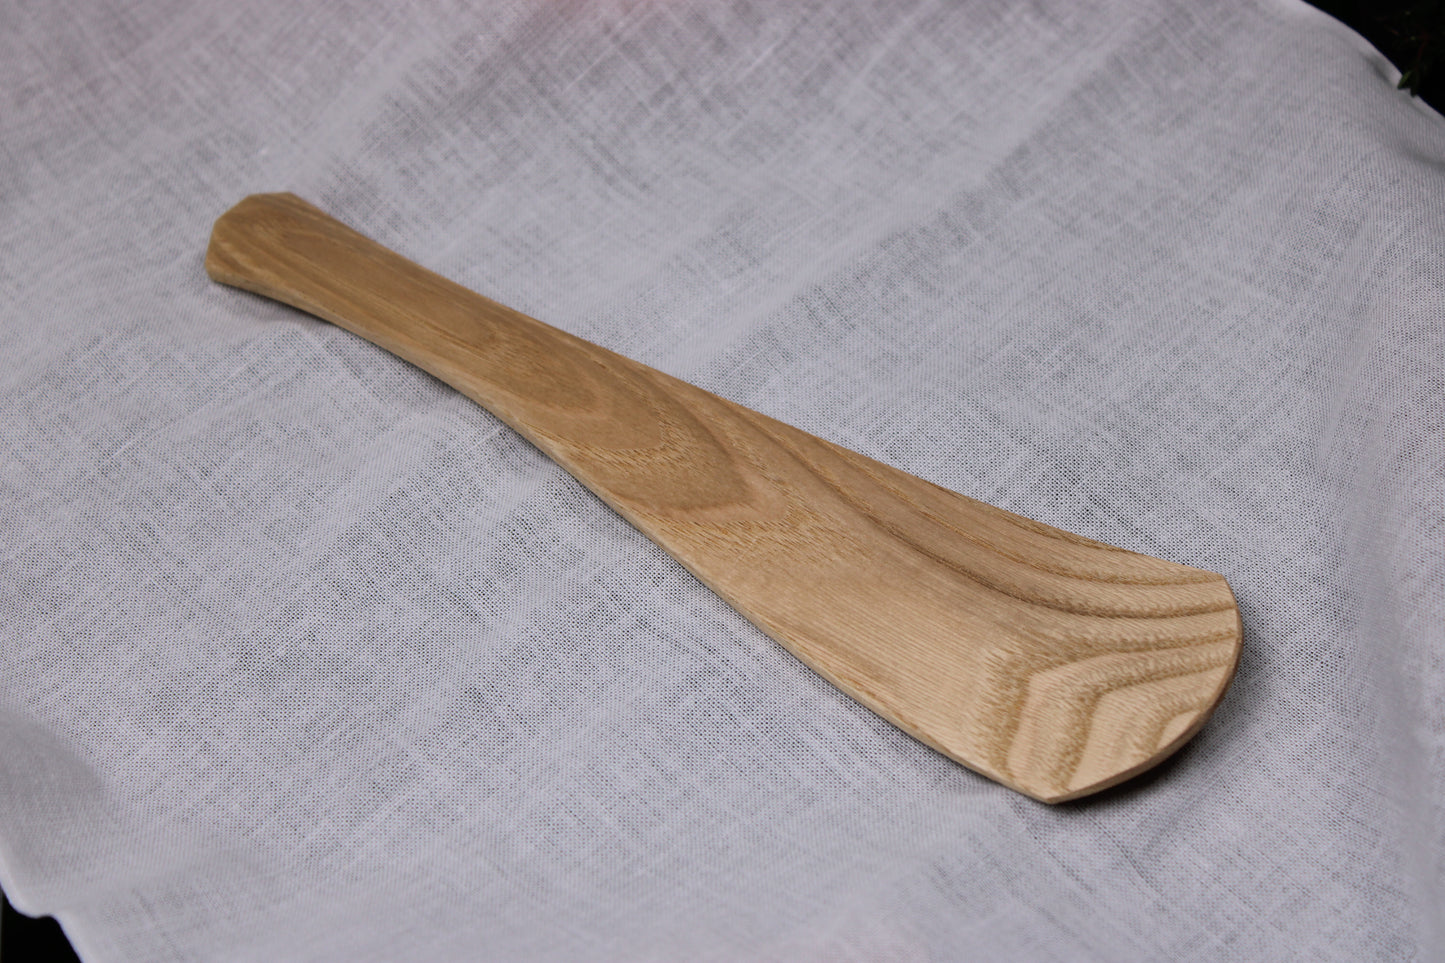 artisan crafted rice scoop made in japan by okubo house mokosho white towel in background